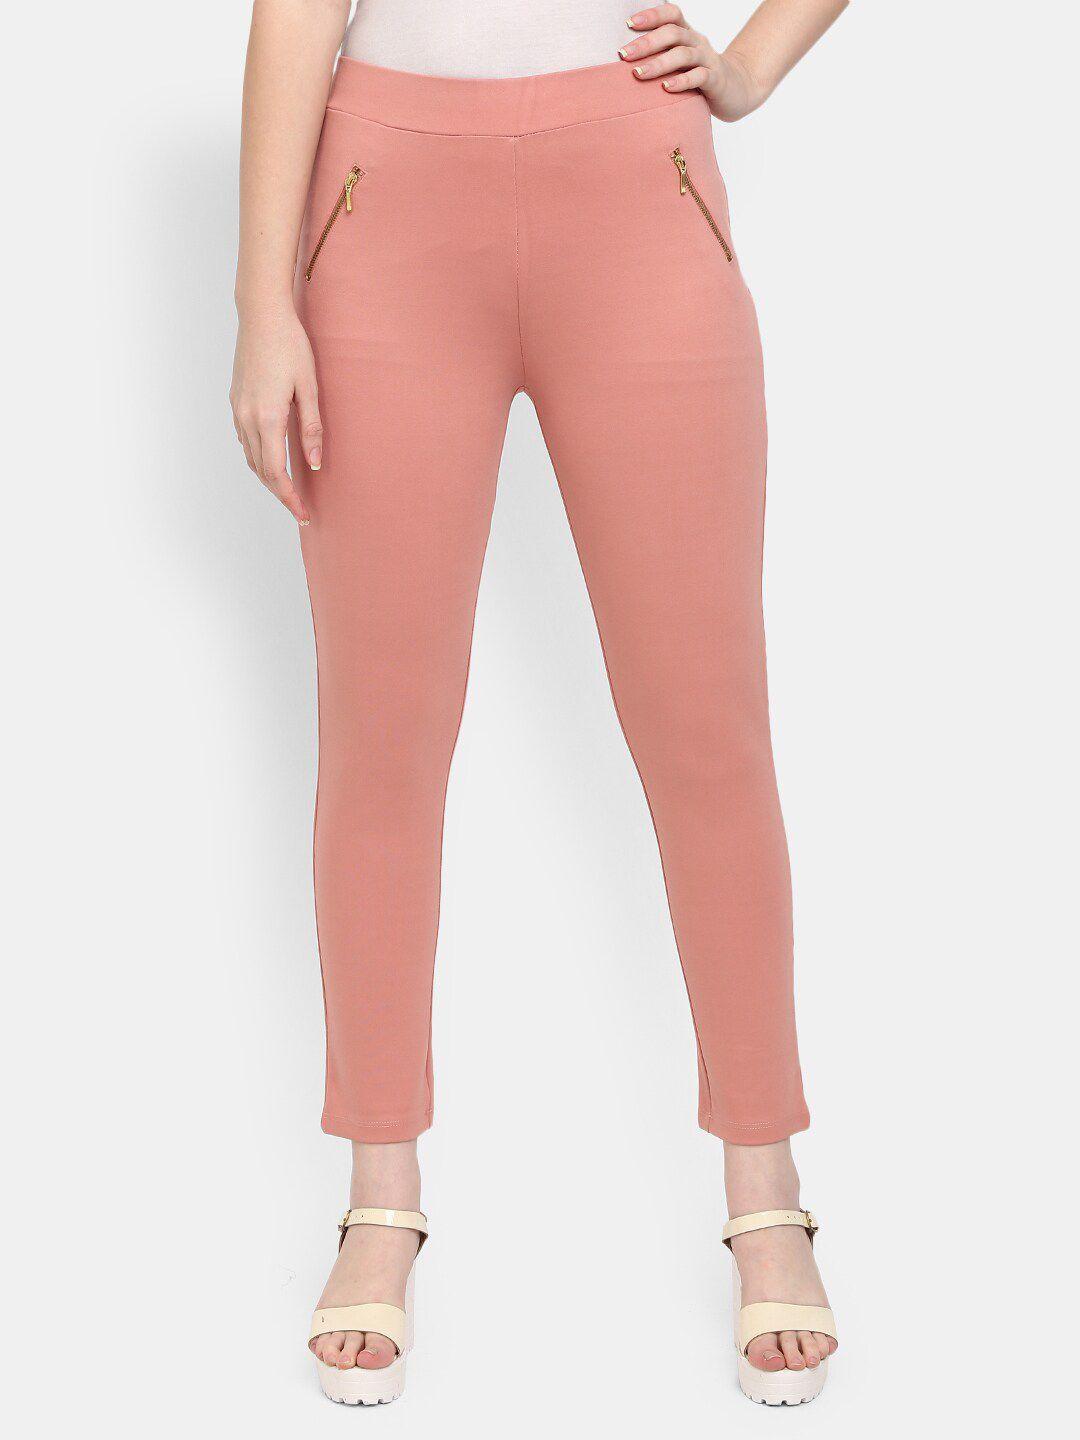 v-mart women peach-coloured solid cropped jeggings